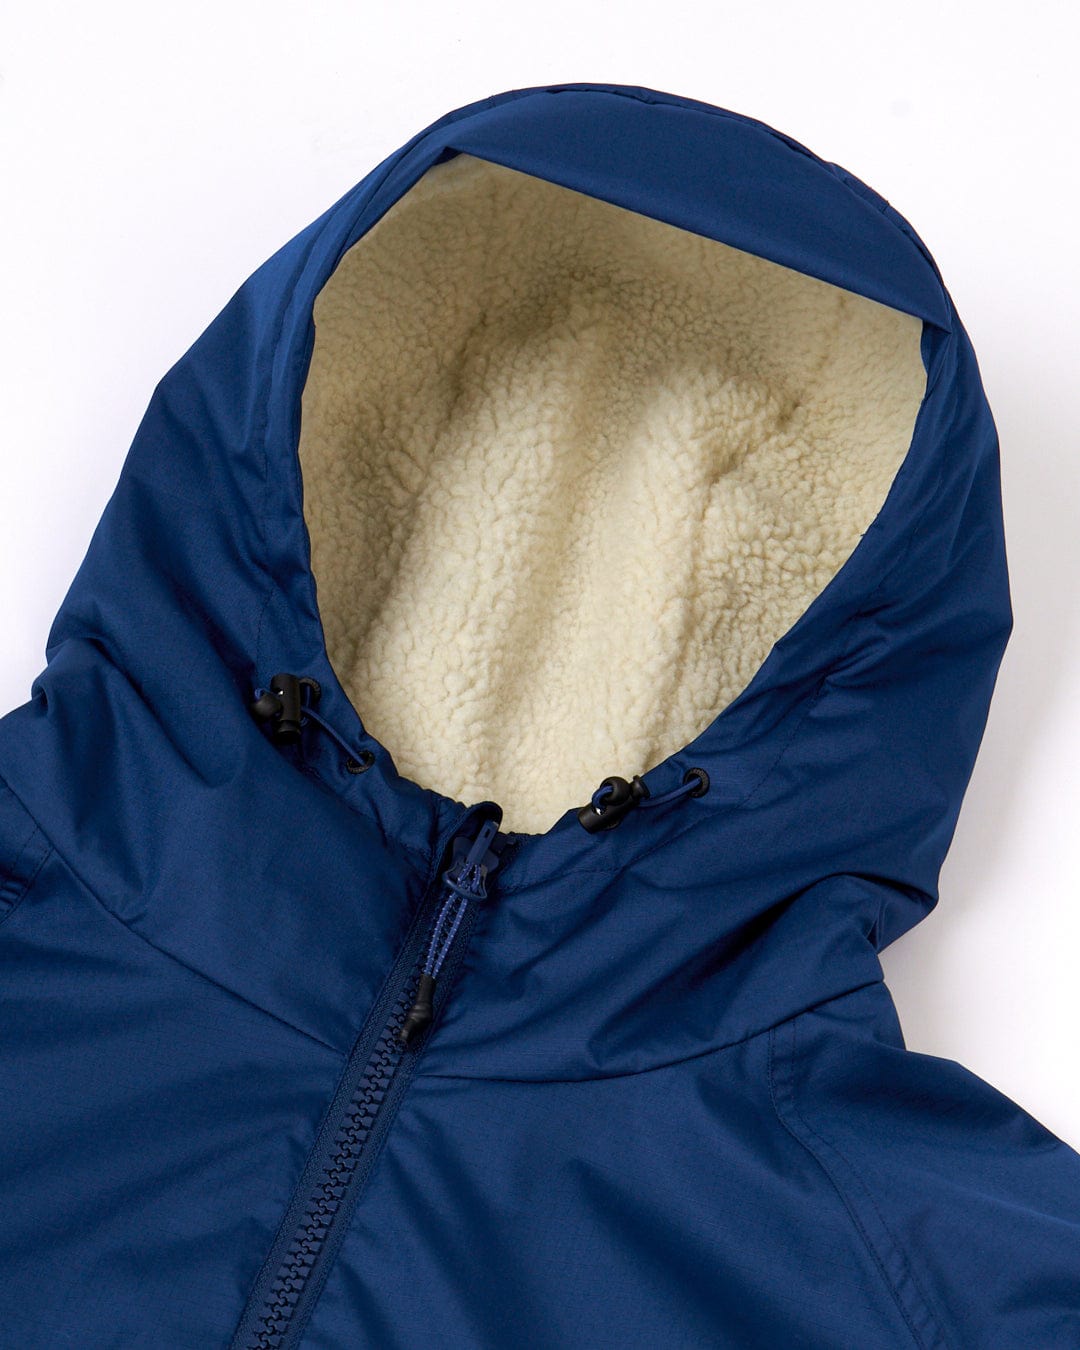 Saltrock's Recycled Four Seasons Changing Robe - Blue with a fleece-lined hood against a white background.